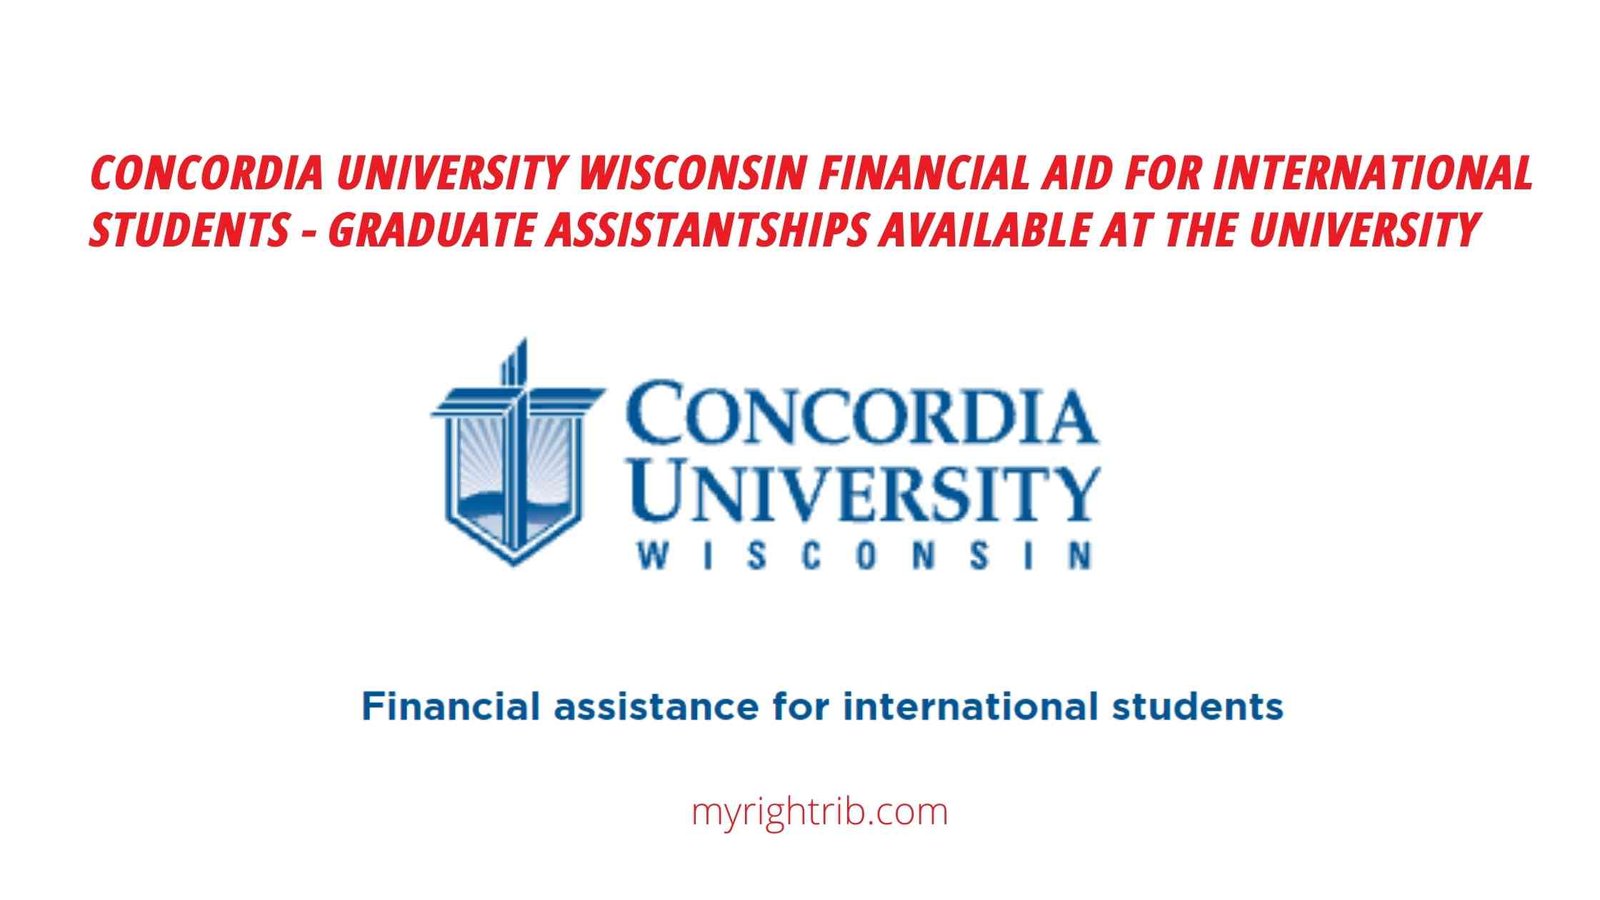 Concordia University Wisconsin Financial Aid for International Students – Graduate Assistantships Available at the University